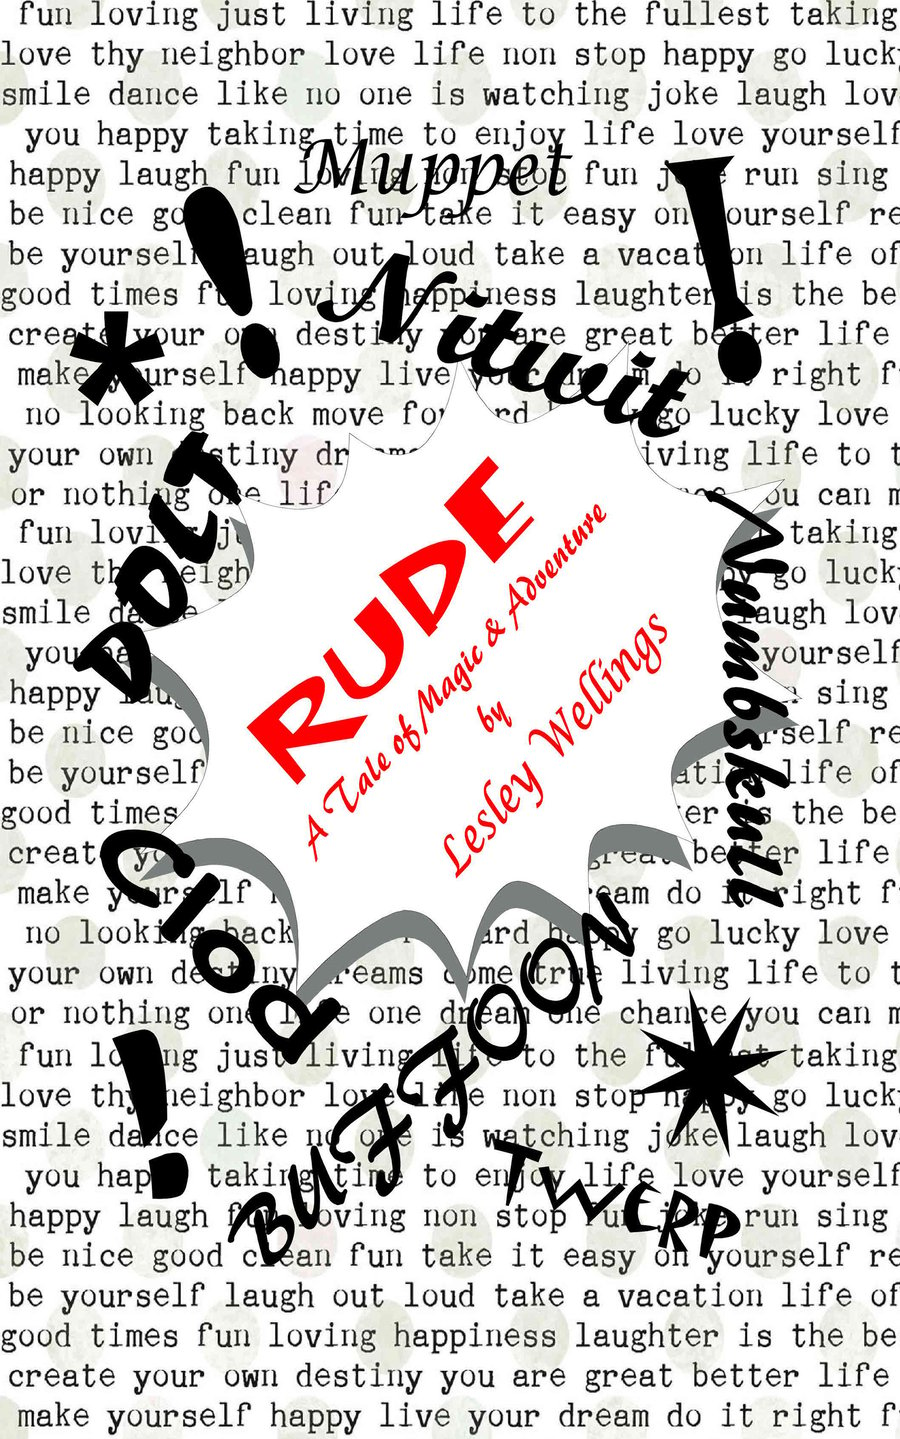 RUDE a Tale of Magic and Adventure